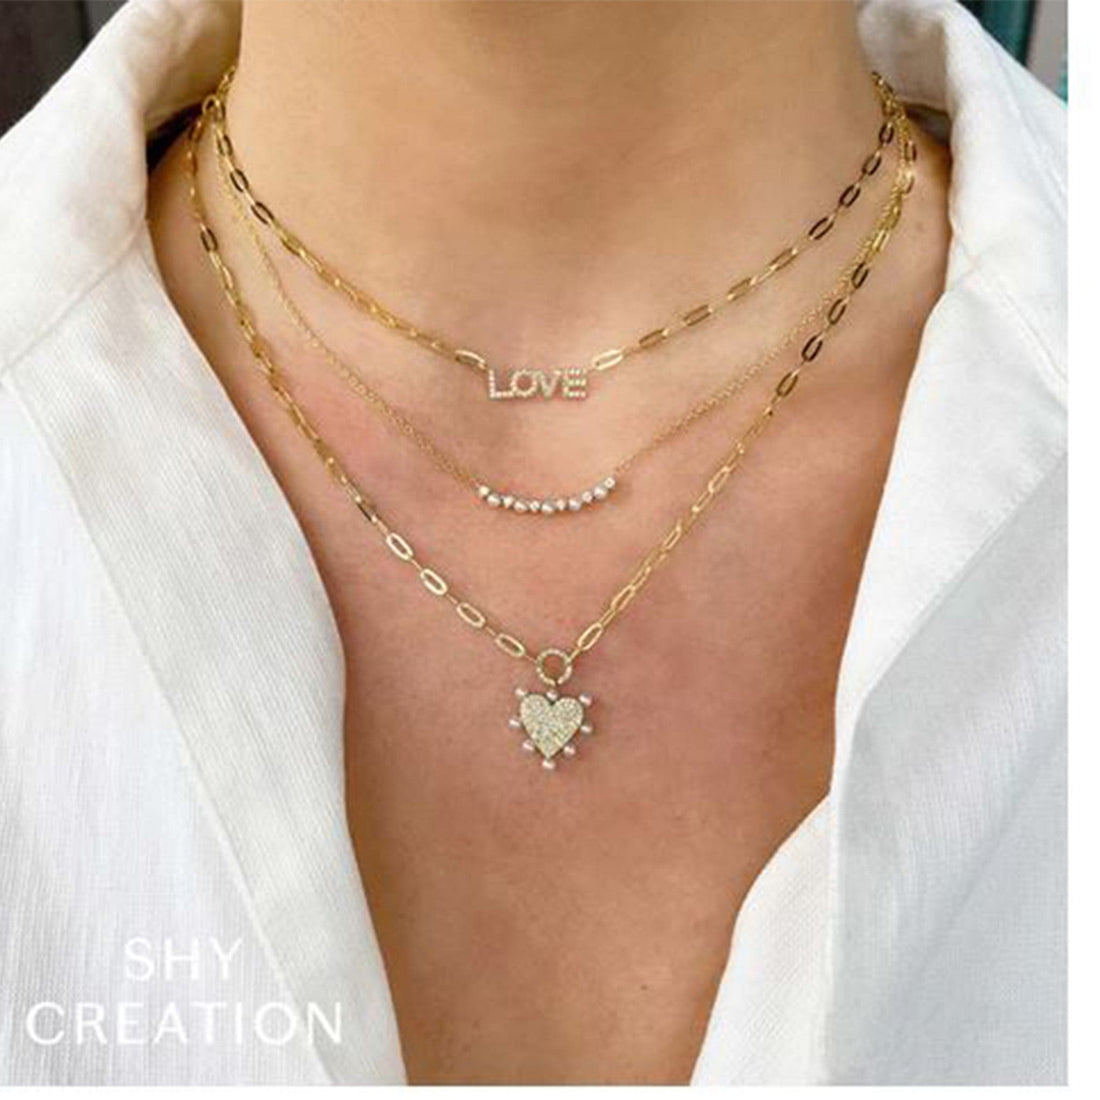 Yellow Gold Love Diamond Pendant Necklace by Shy Creation modeled